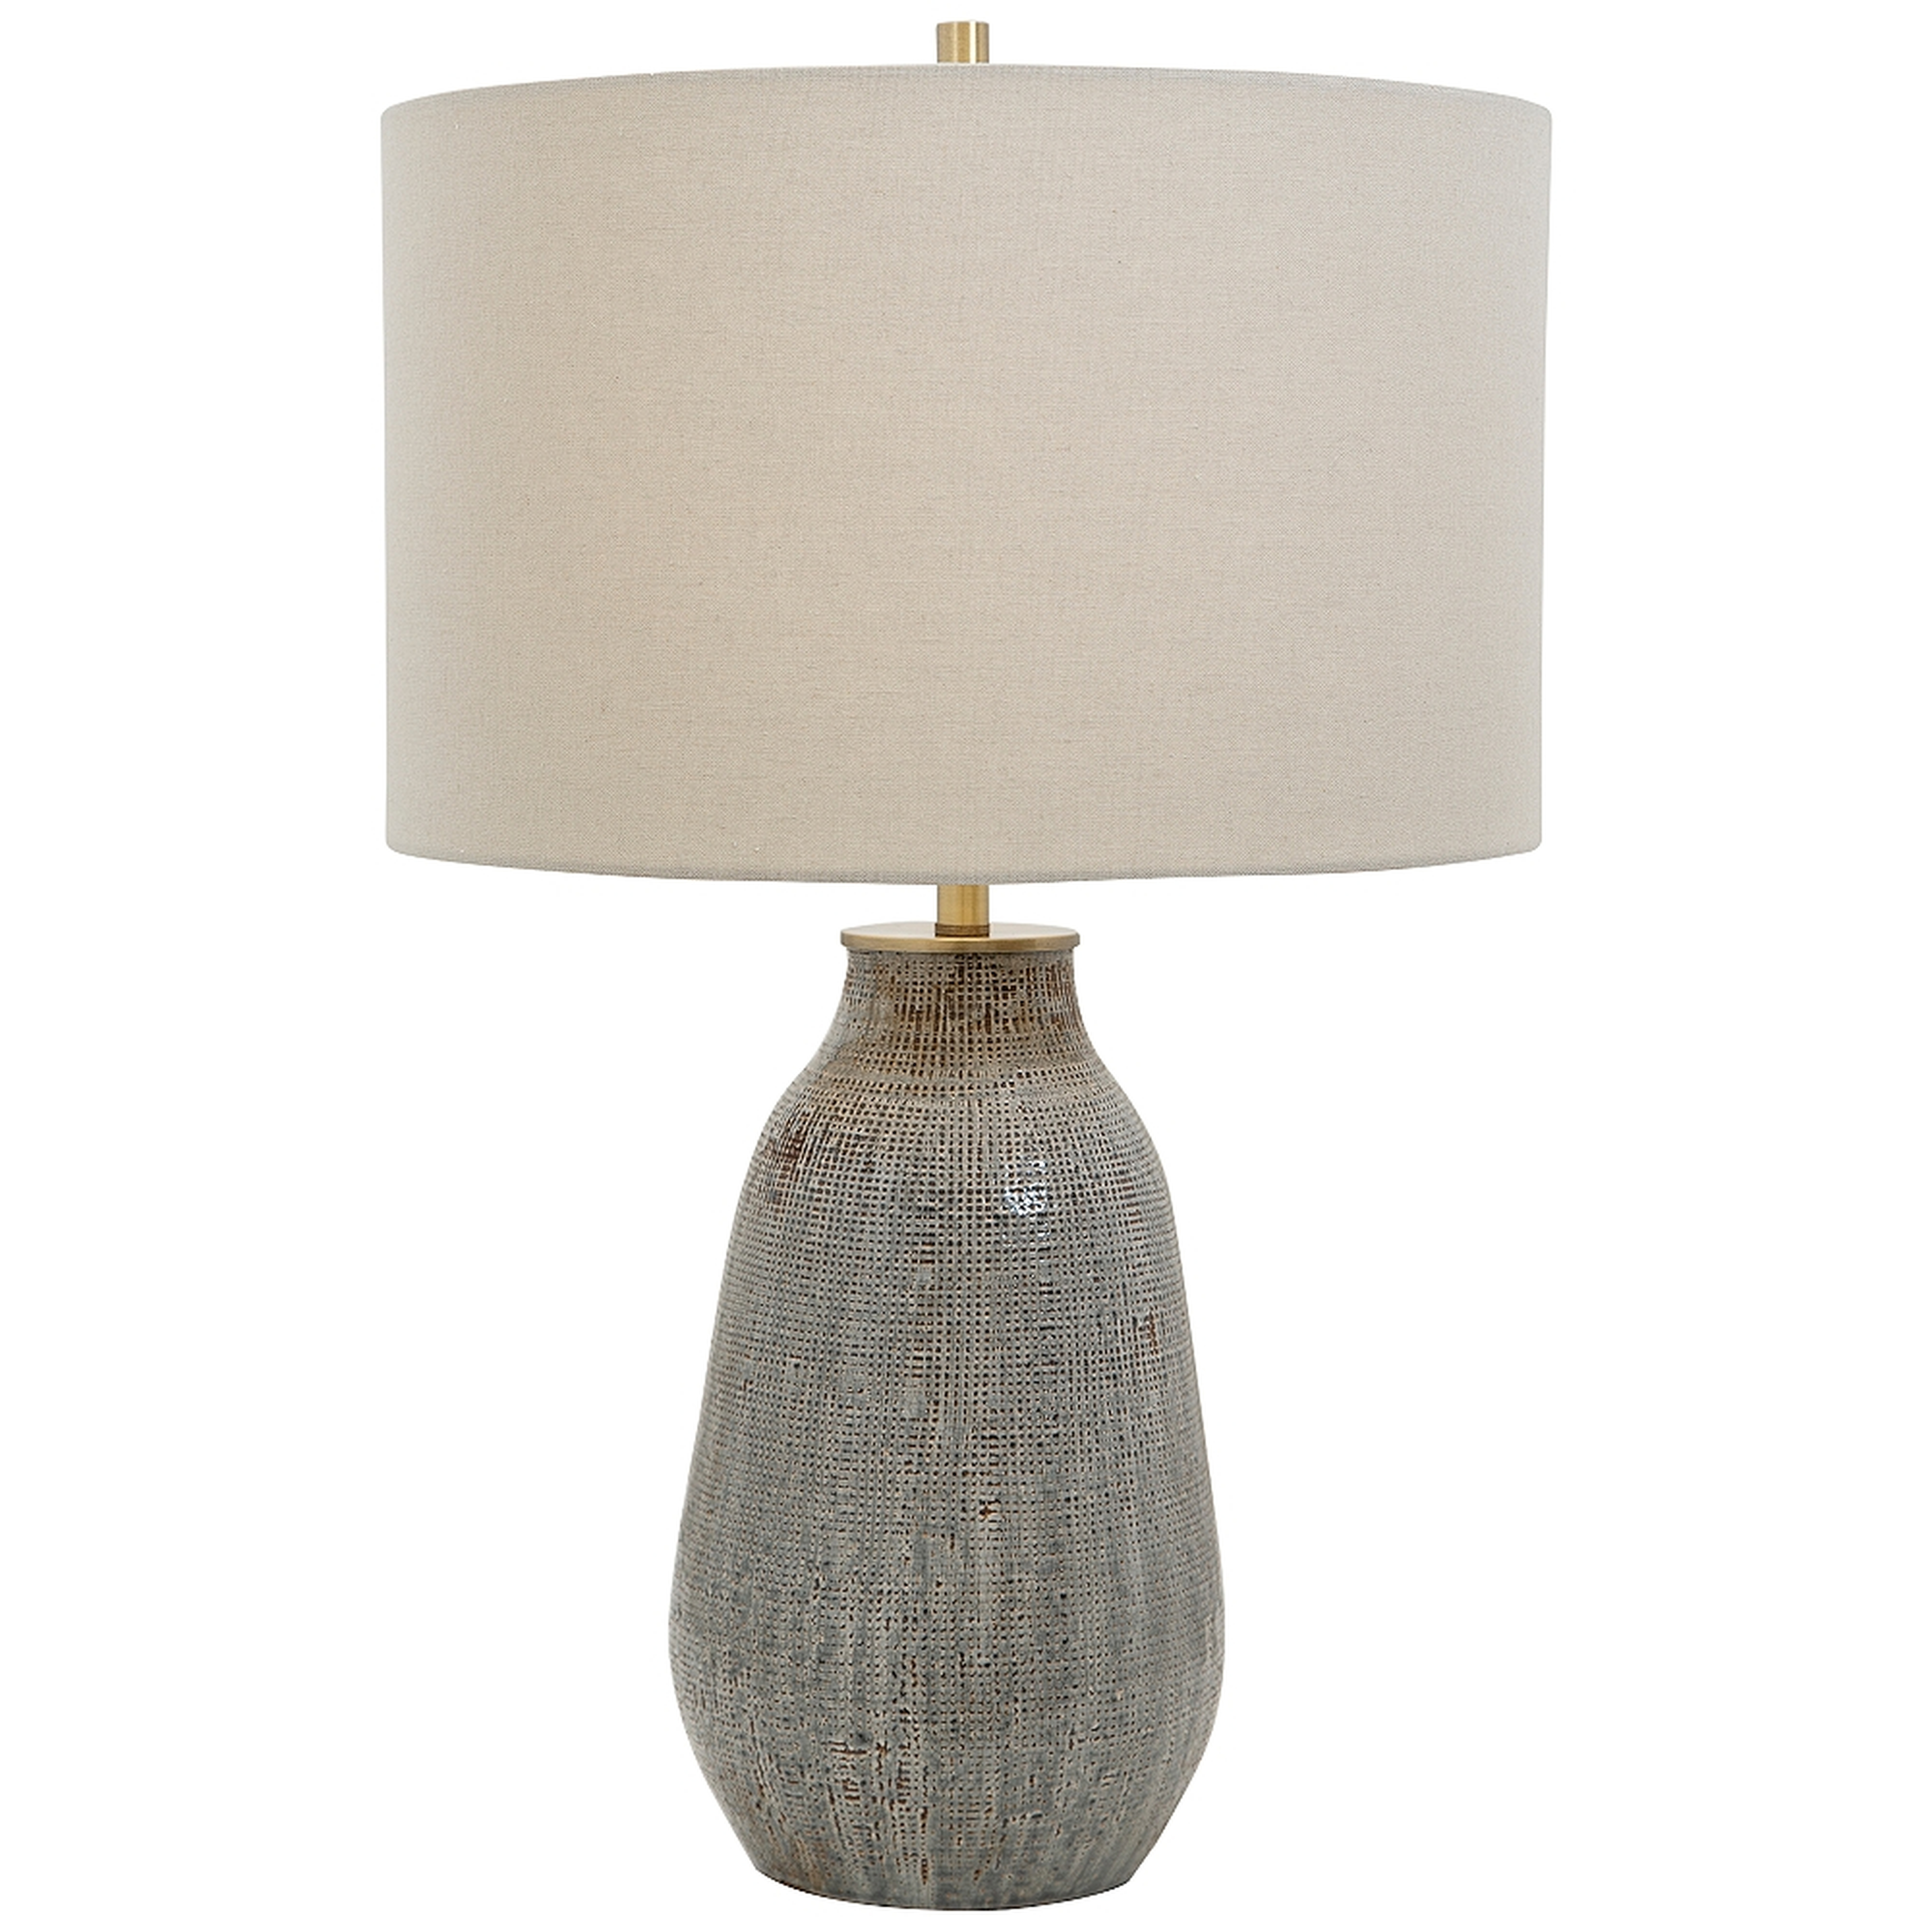 Uttermost Monacan Brown and Gray Ceramic Table Lamp - Style # 583F0 - Lamps Plus